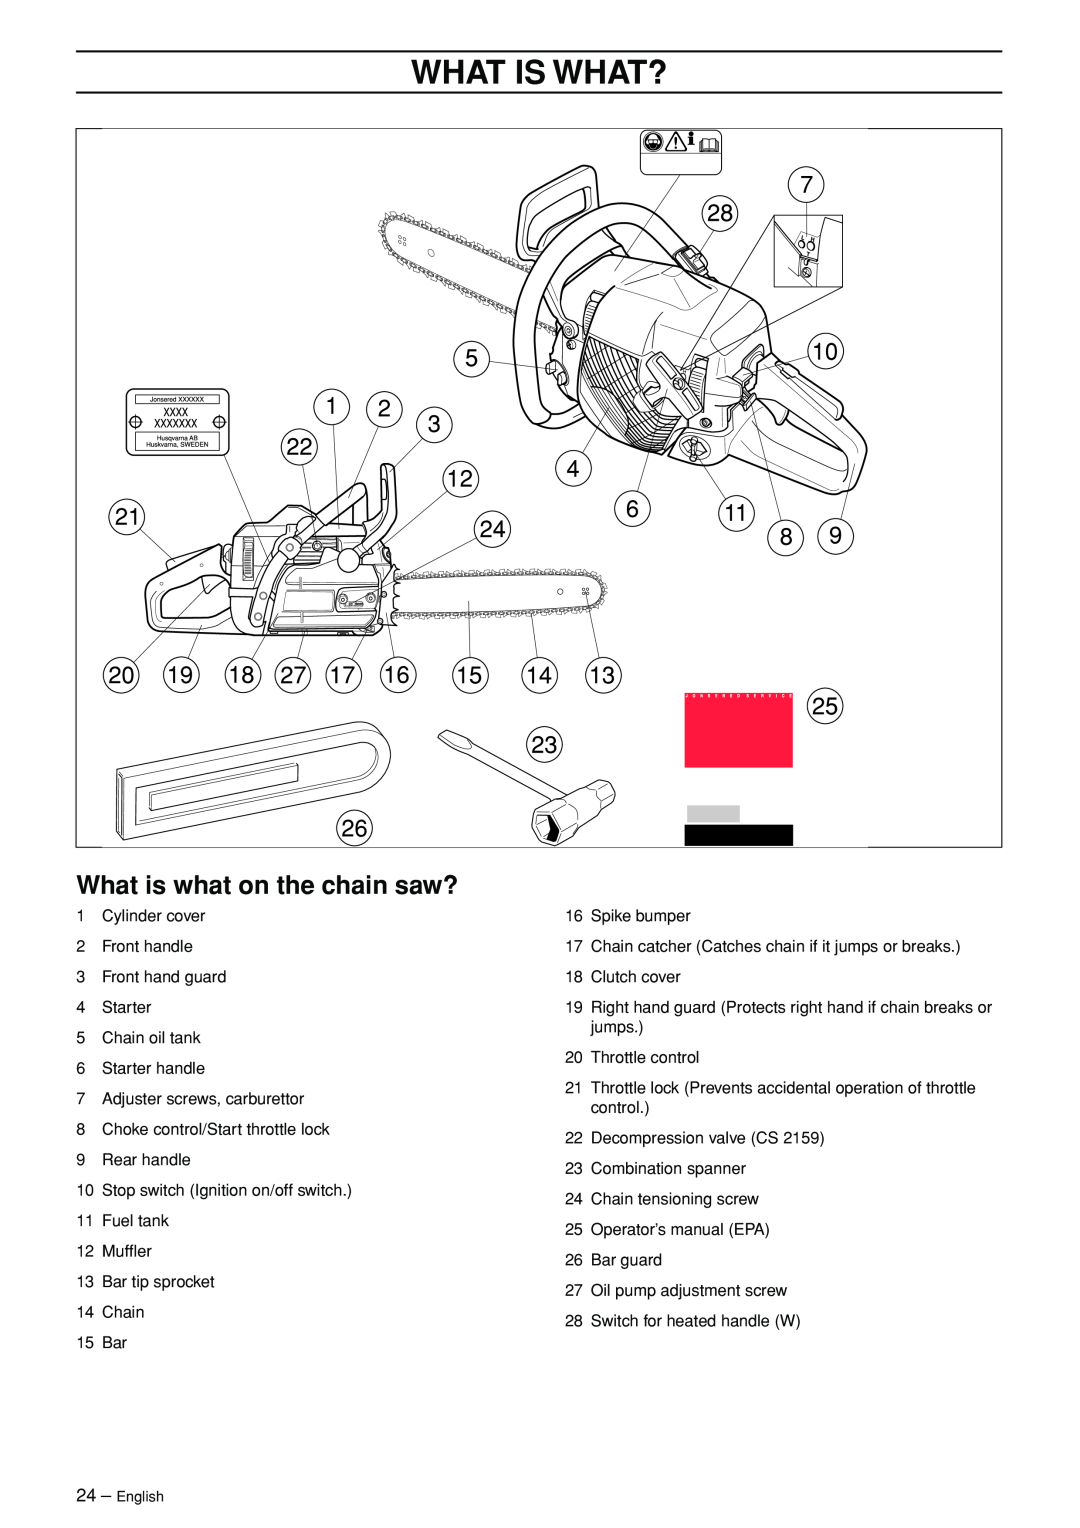 Jonsered CS 2156 manual What Is What?, What is what on the chain saw? 